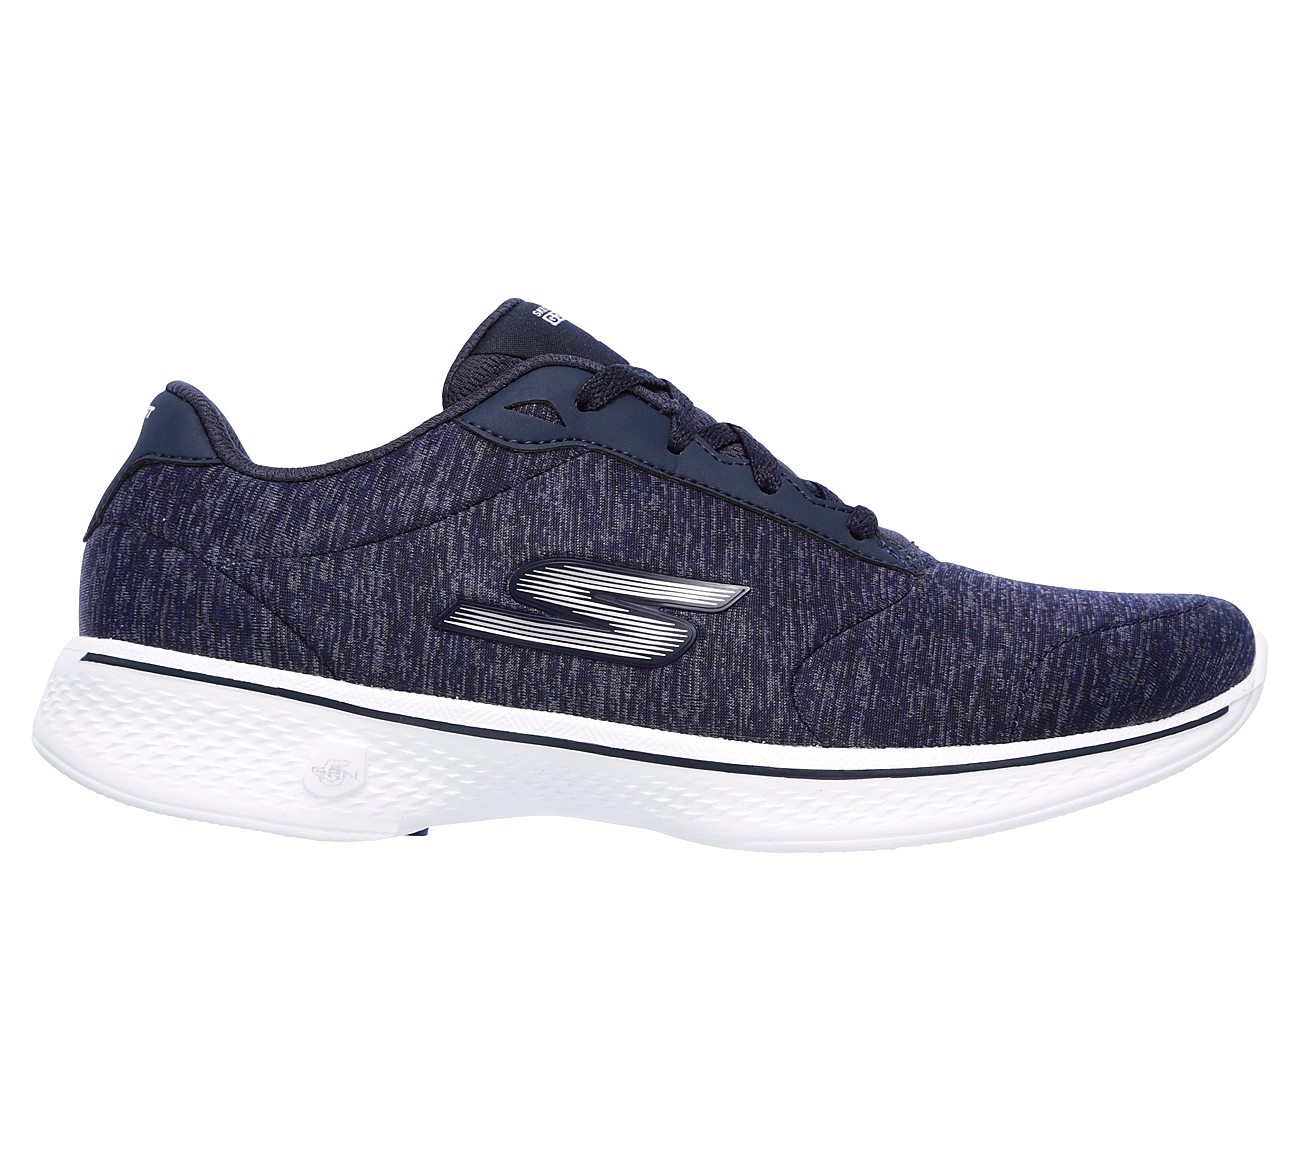 GO WALK 4 - SERENITY, NAVY/WHITE Footwear Lateral View